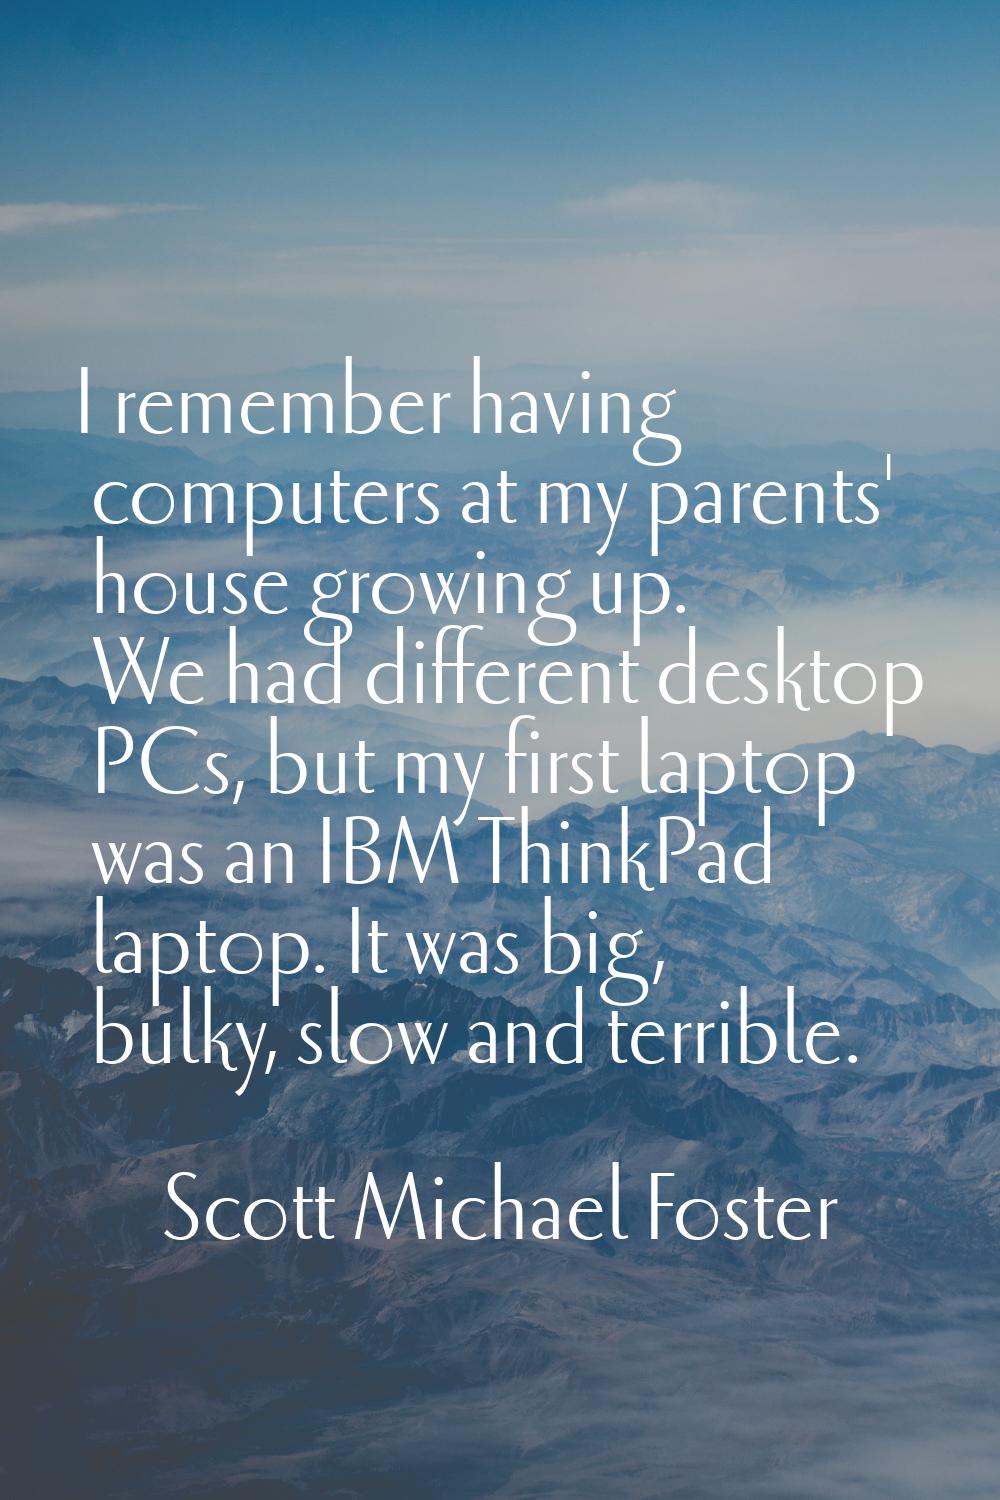 I remember having computers at my parents' house growing up. We had different desktop PCs, but my f